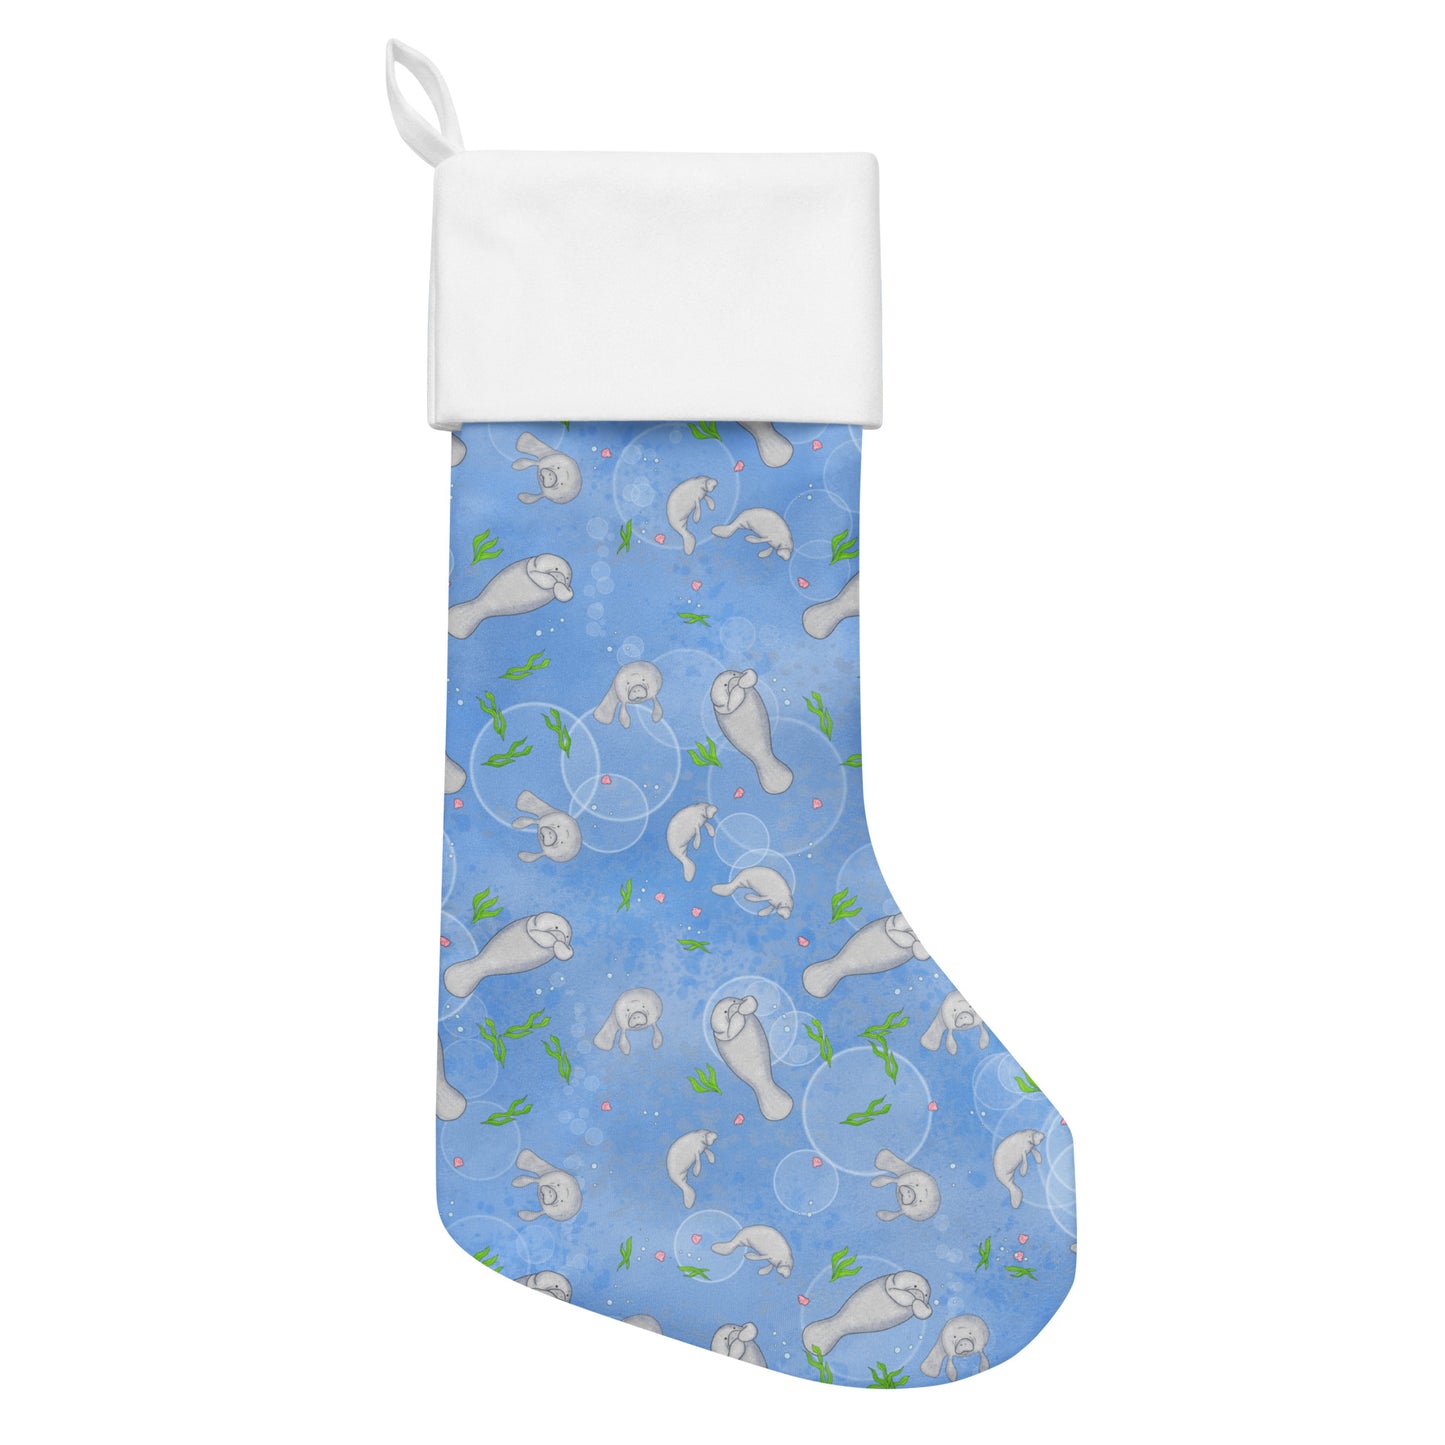 Limited Edition Manatee Christmas Stocking.  7 by 18 inches. The front has a hand-illustrated manatee design with an off-white polyester fabric on the back. It has a white fold-over cuff and a loop for hanging. Flat lay view.